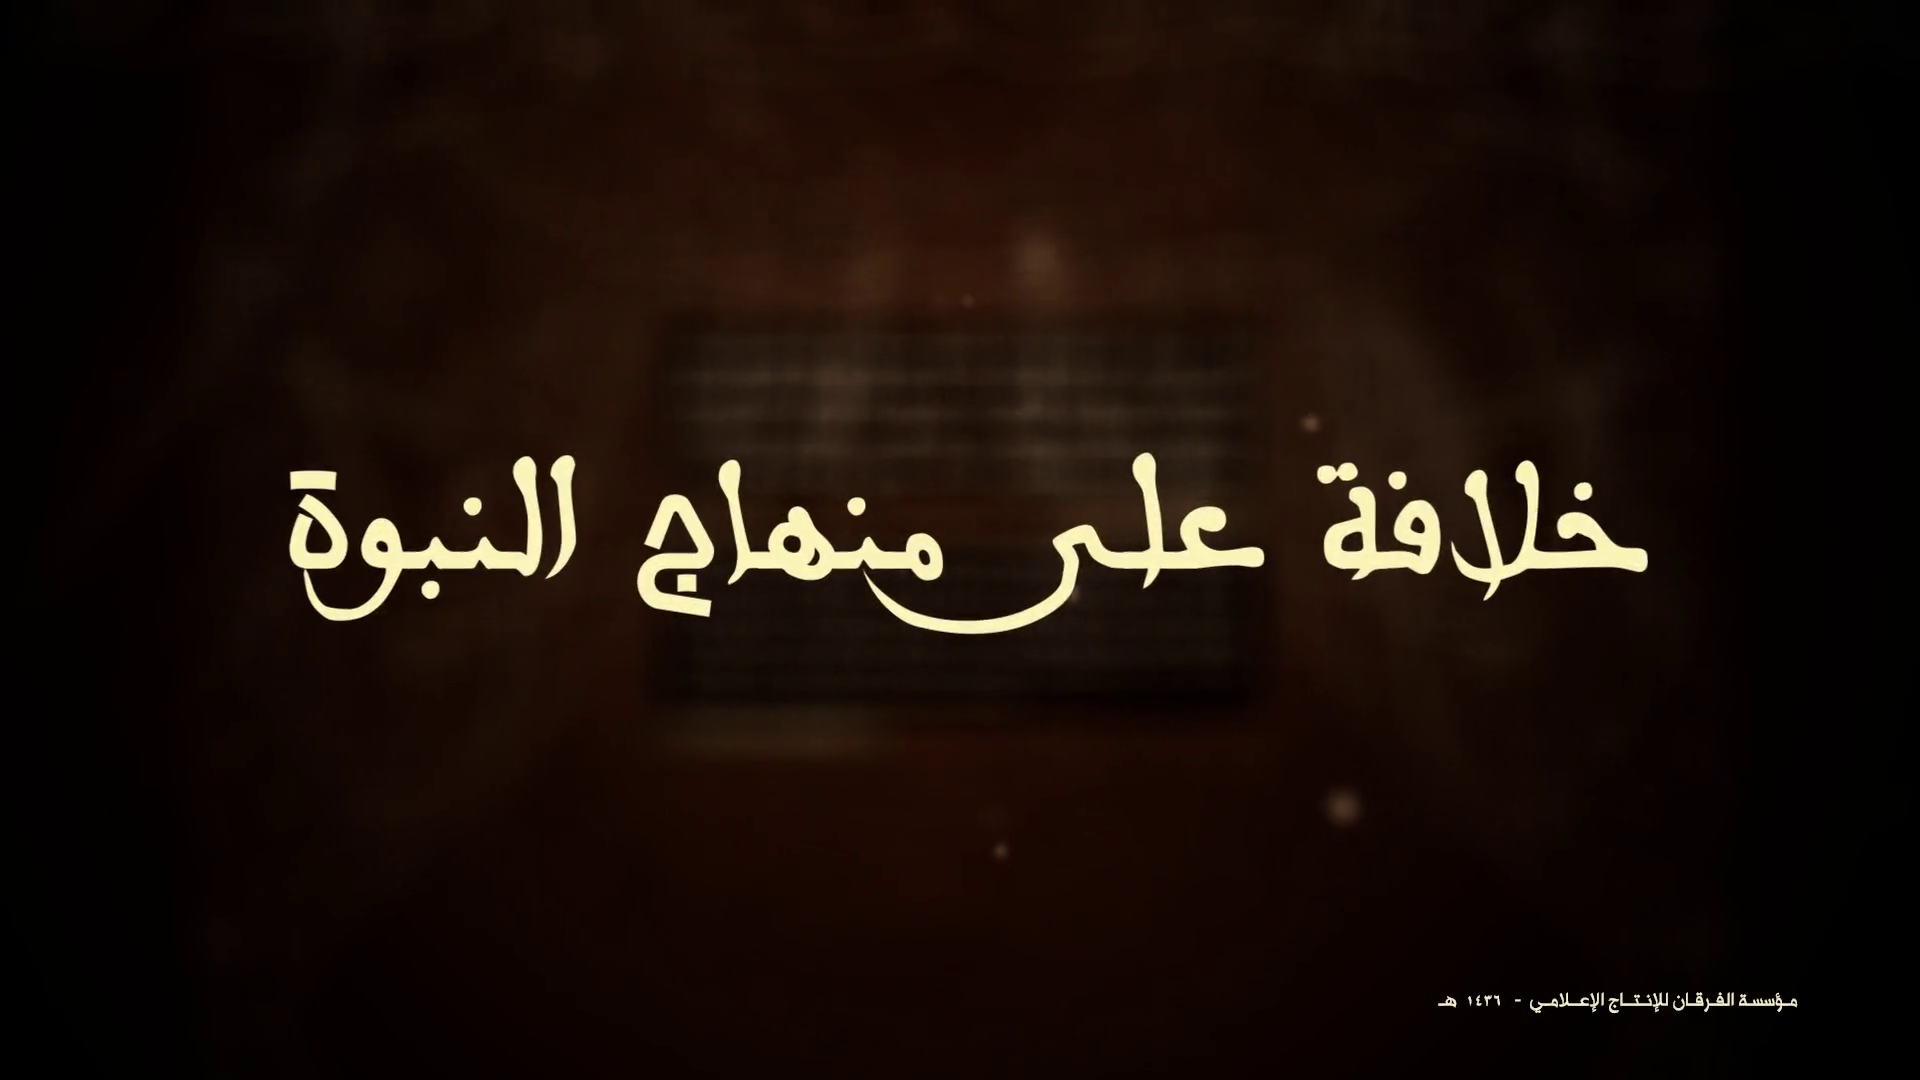 Arabic Text Caliphate Upon The Prophetic Path HD Wallpaper